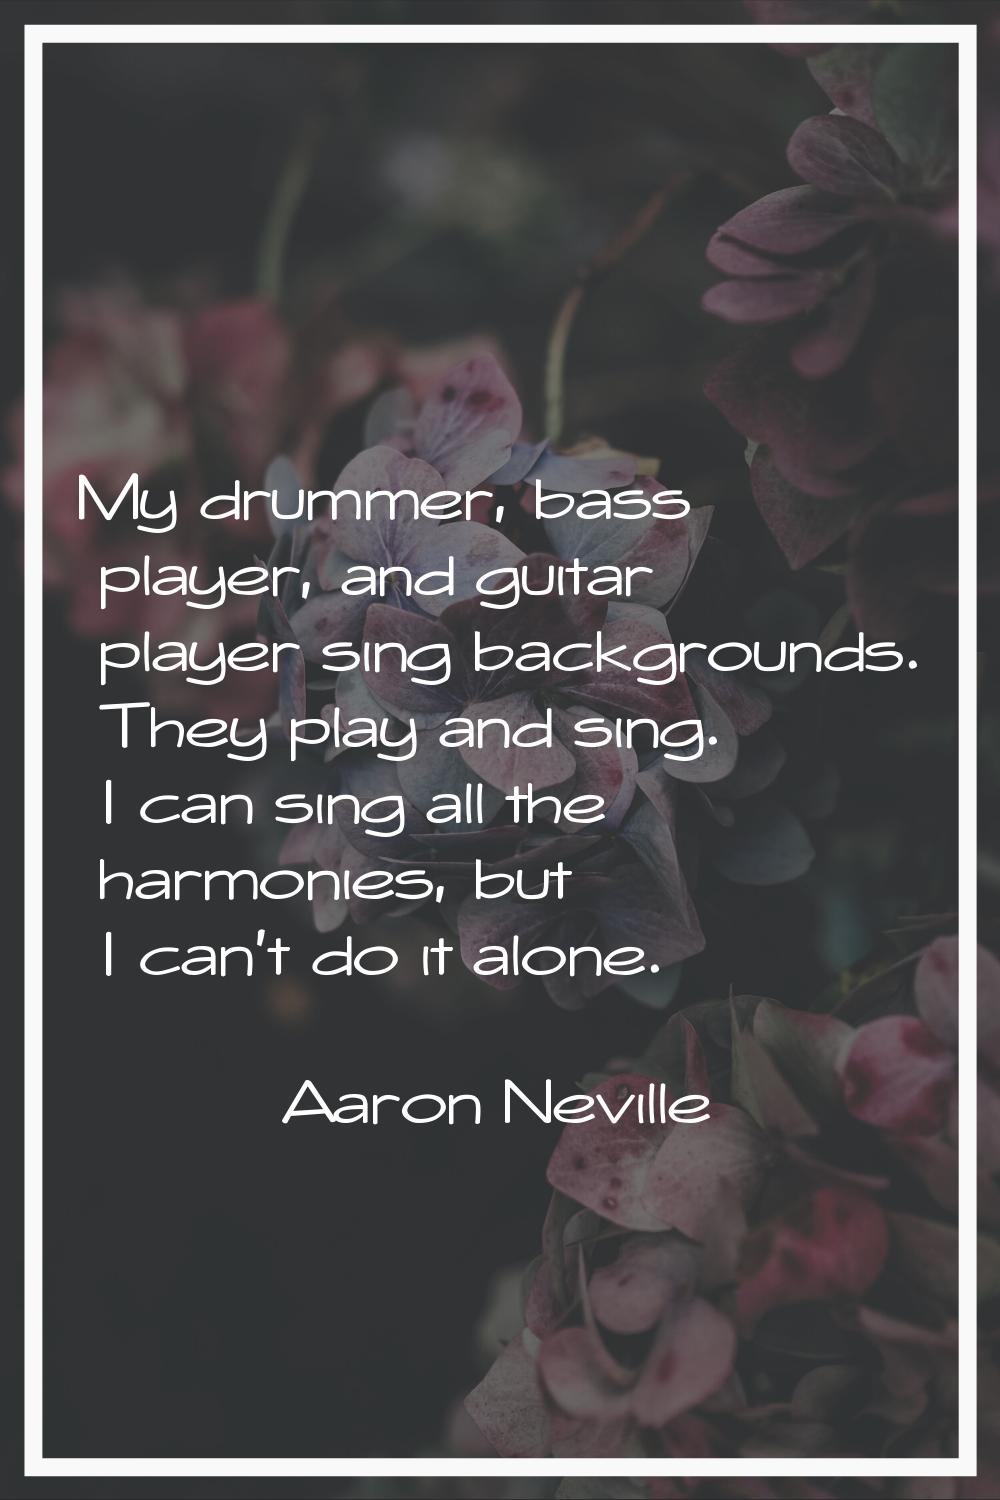 My drummer, bass player, and guitar player sing backgrounds. They play and sing. I can sing all the